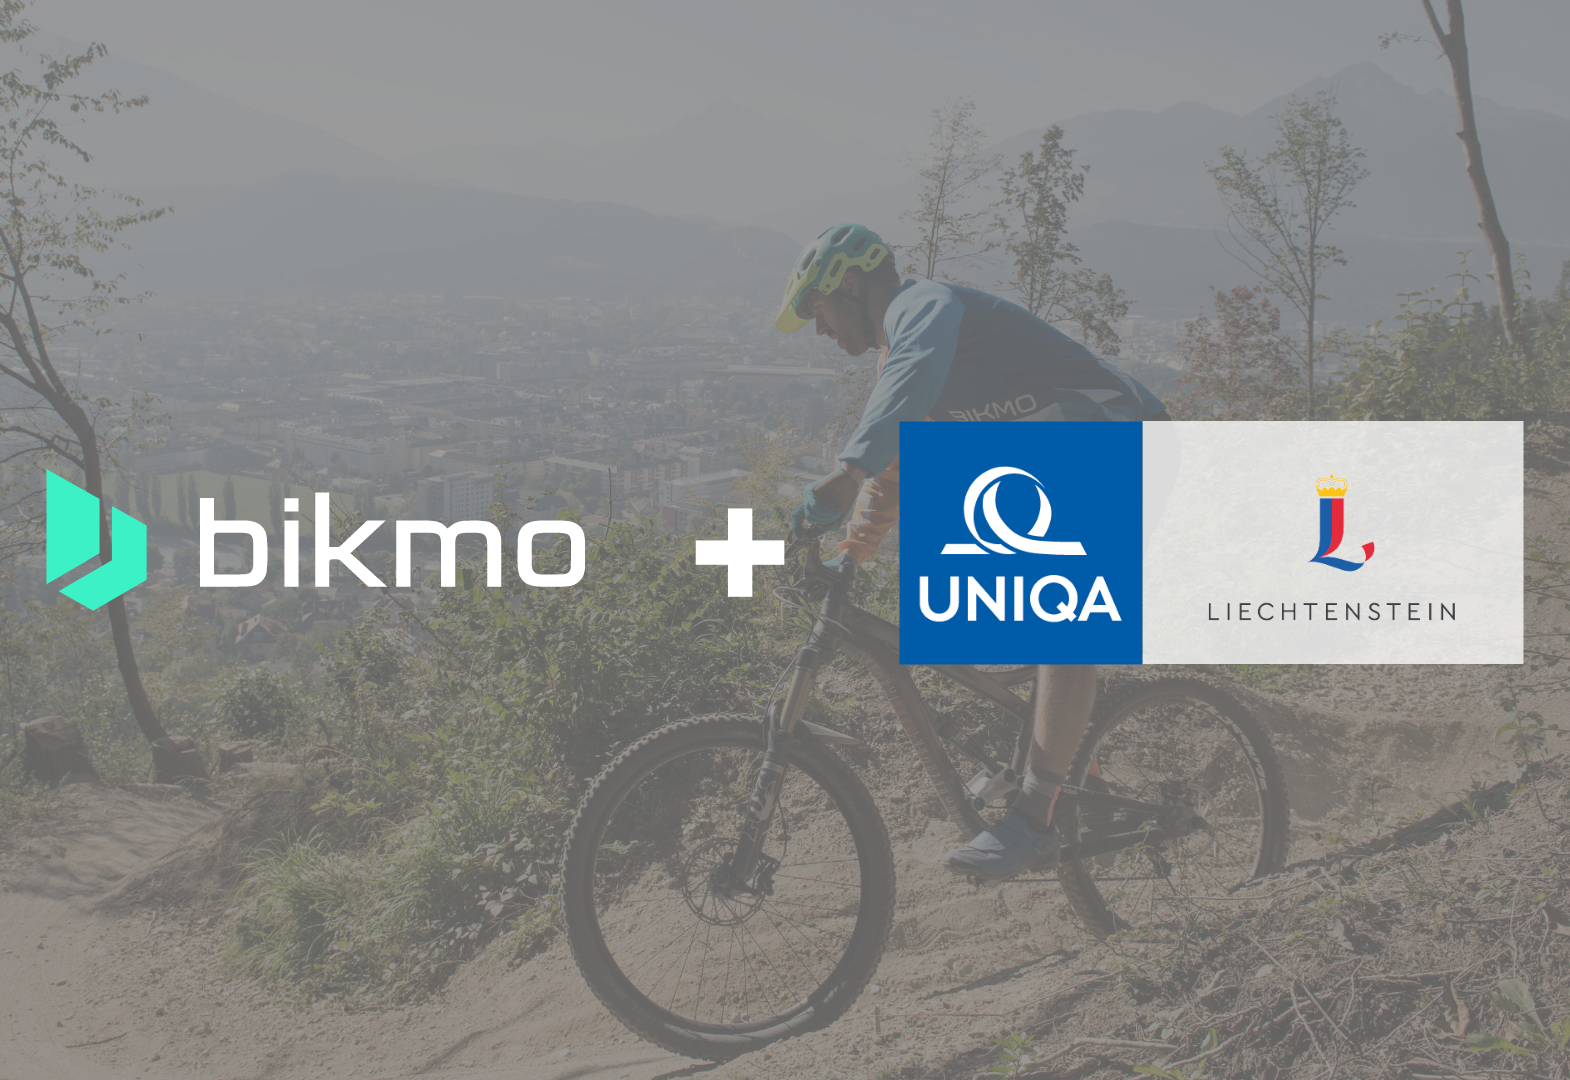 Bikmo and UNIQA partner to drive insurance innovation in the European cycle market